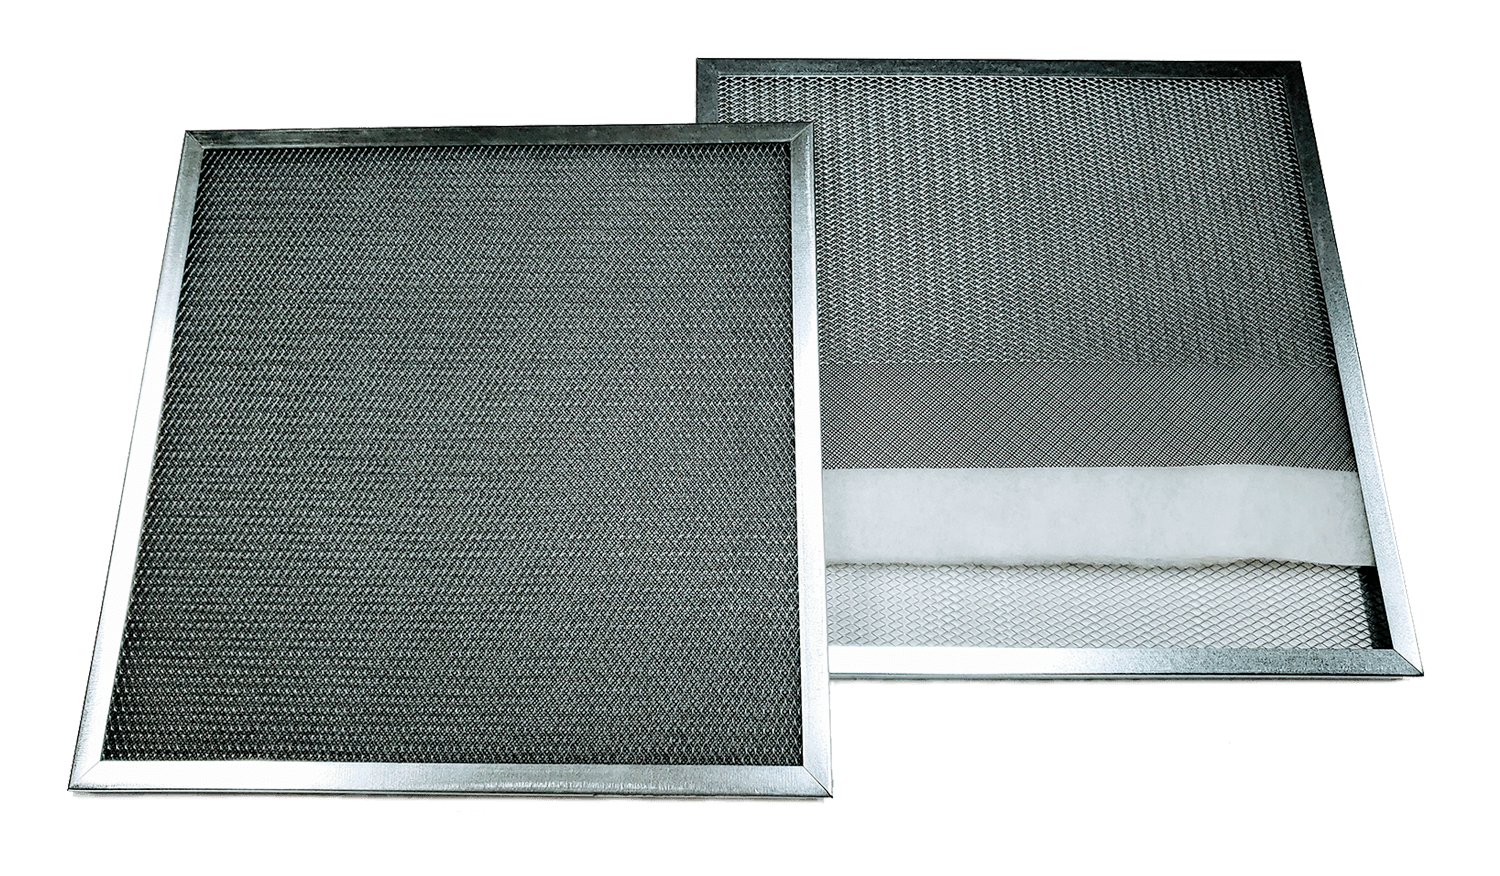 Details about   DUST EATER 20X20 ELECTRO STATIC AIR FILTER TWO 1/4" PANELS INSIDE 1" FRAME